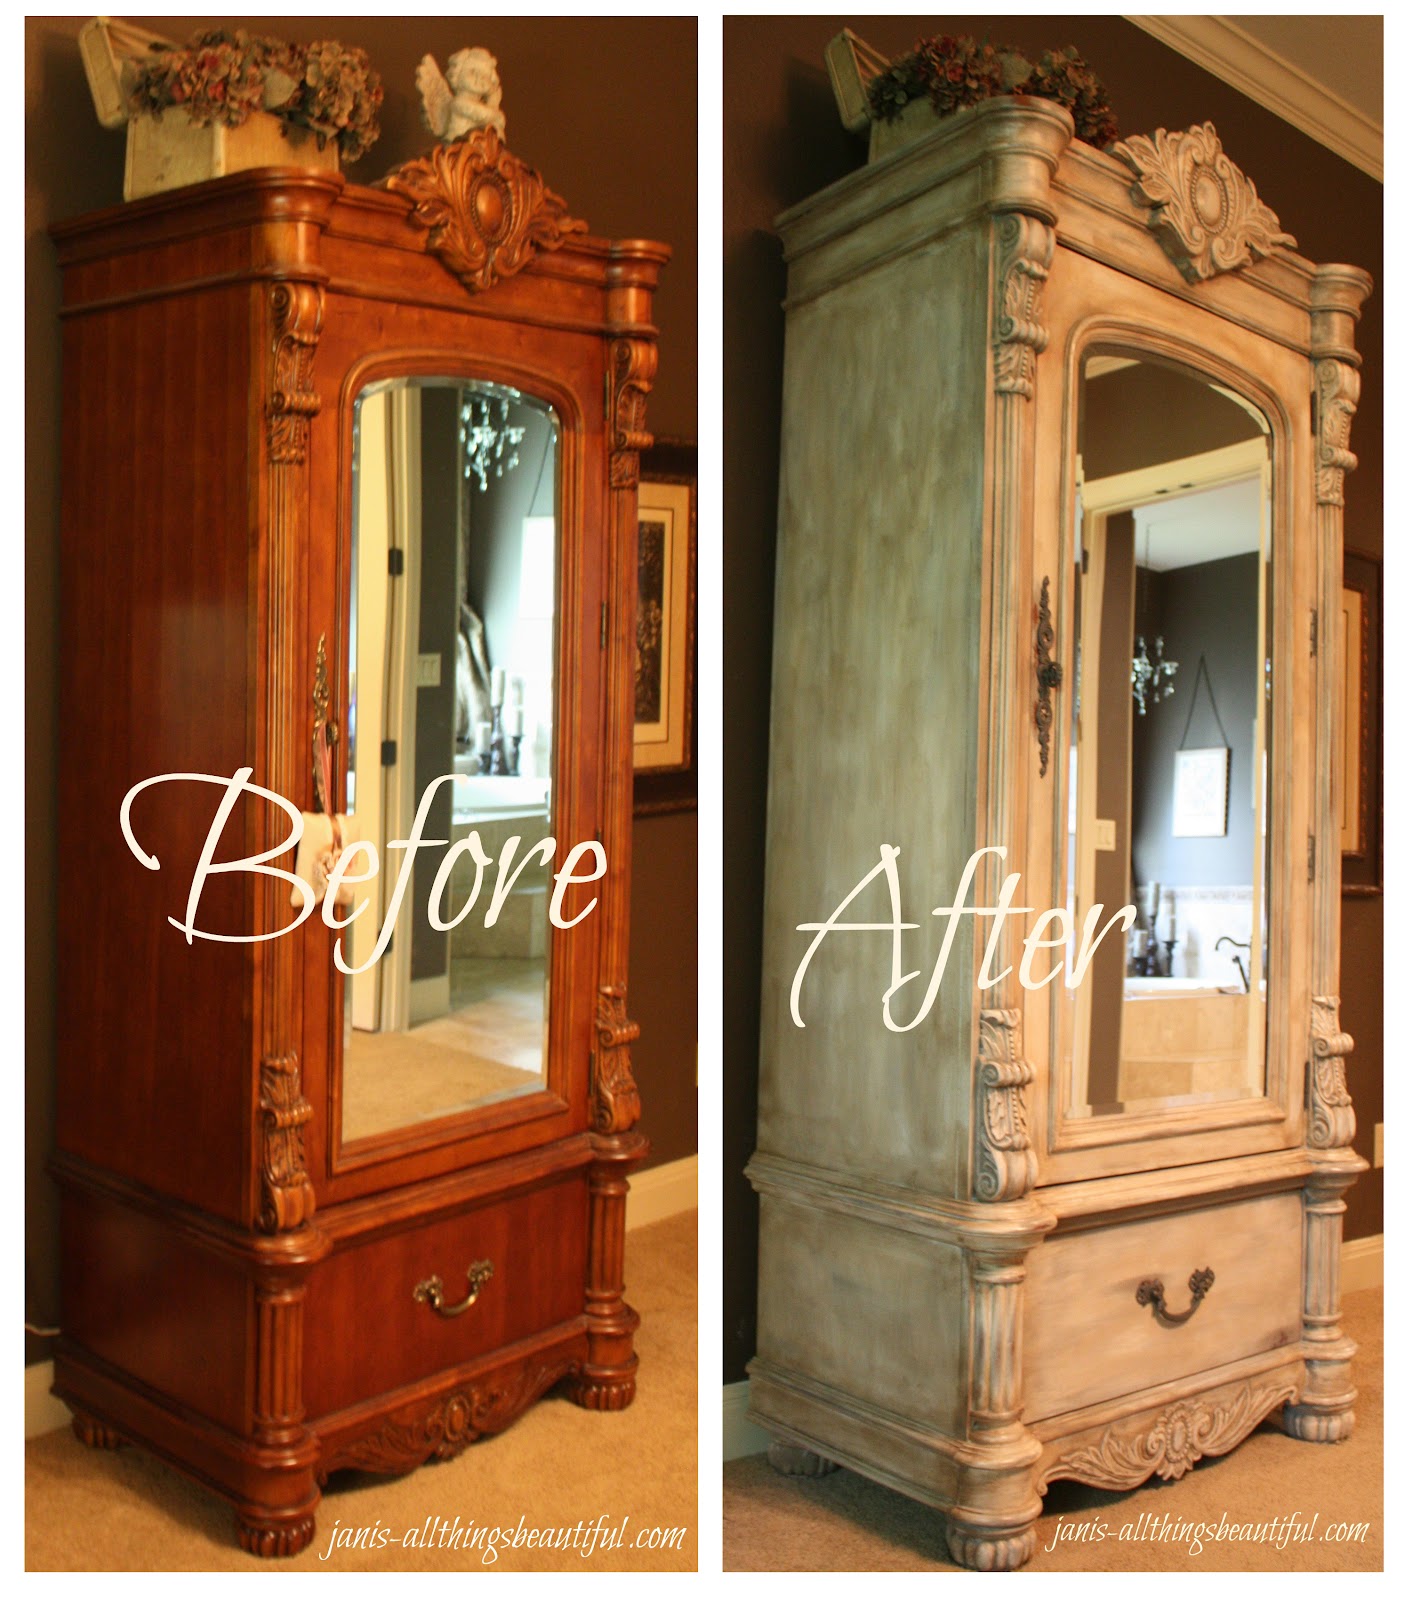 All Things Beautiful: Armoire {Painted Furniture} Makeover